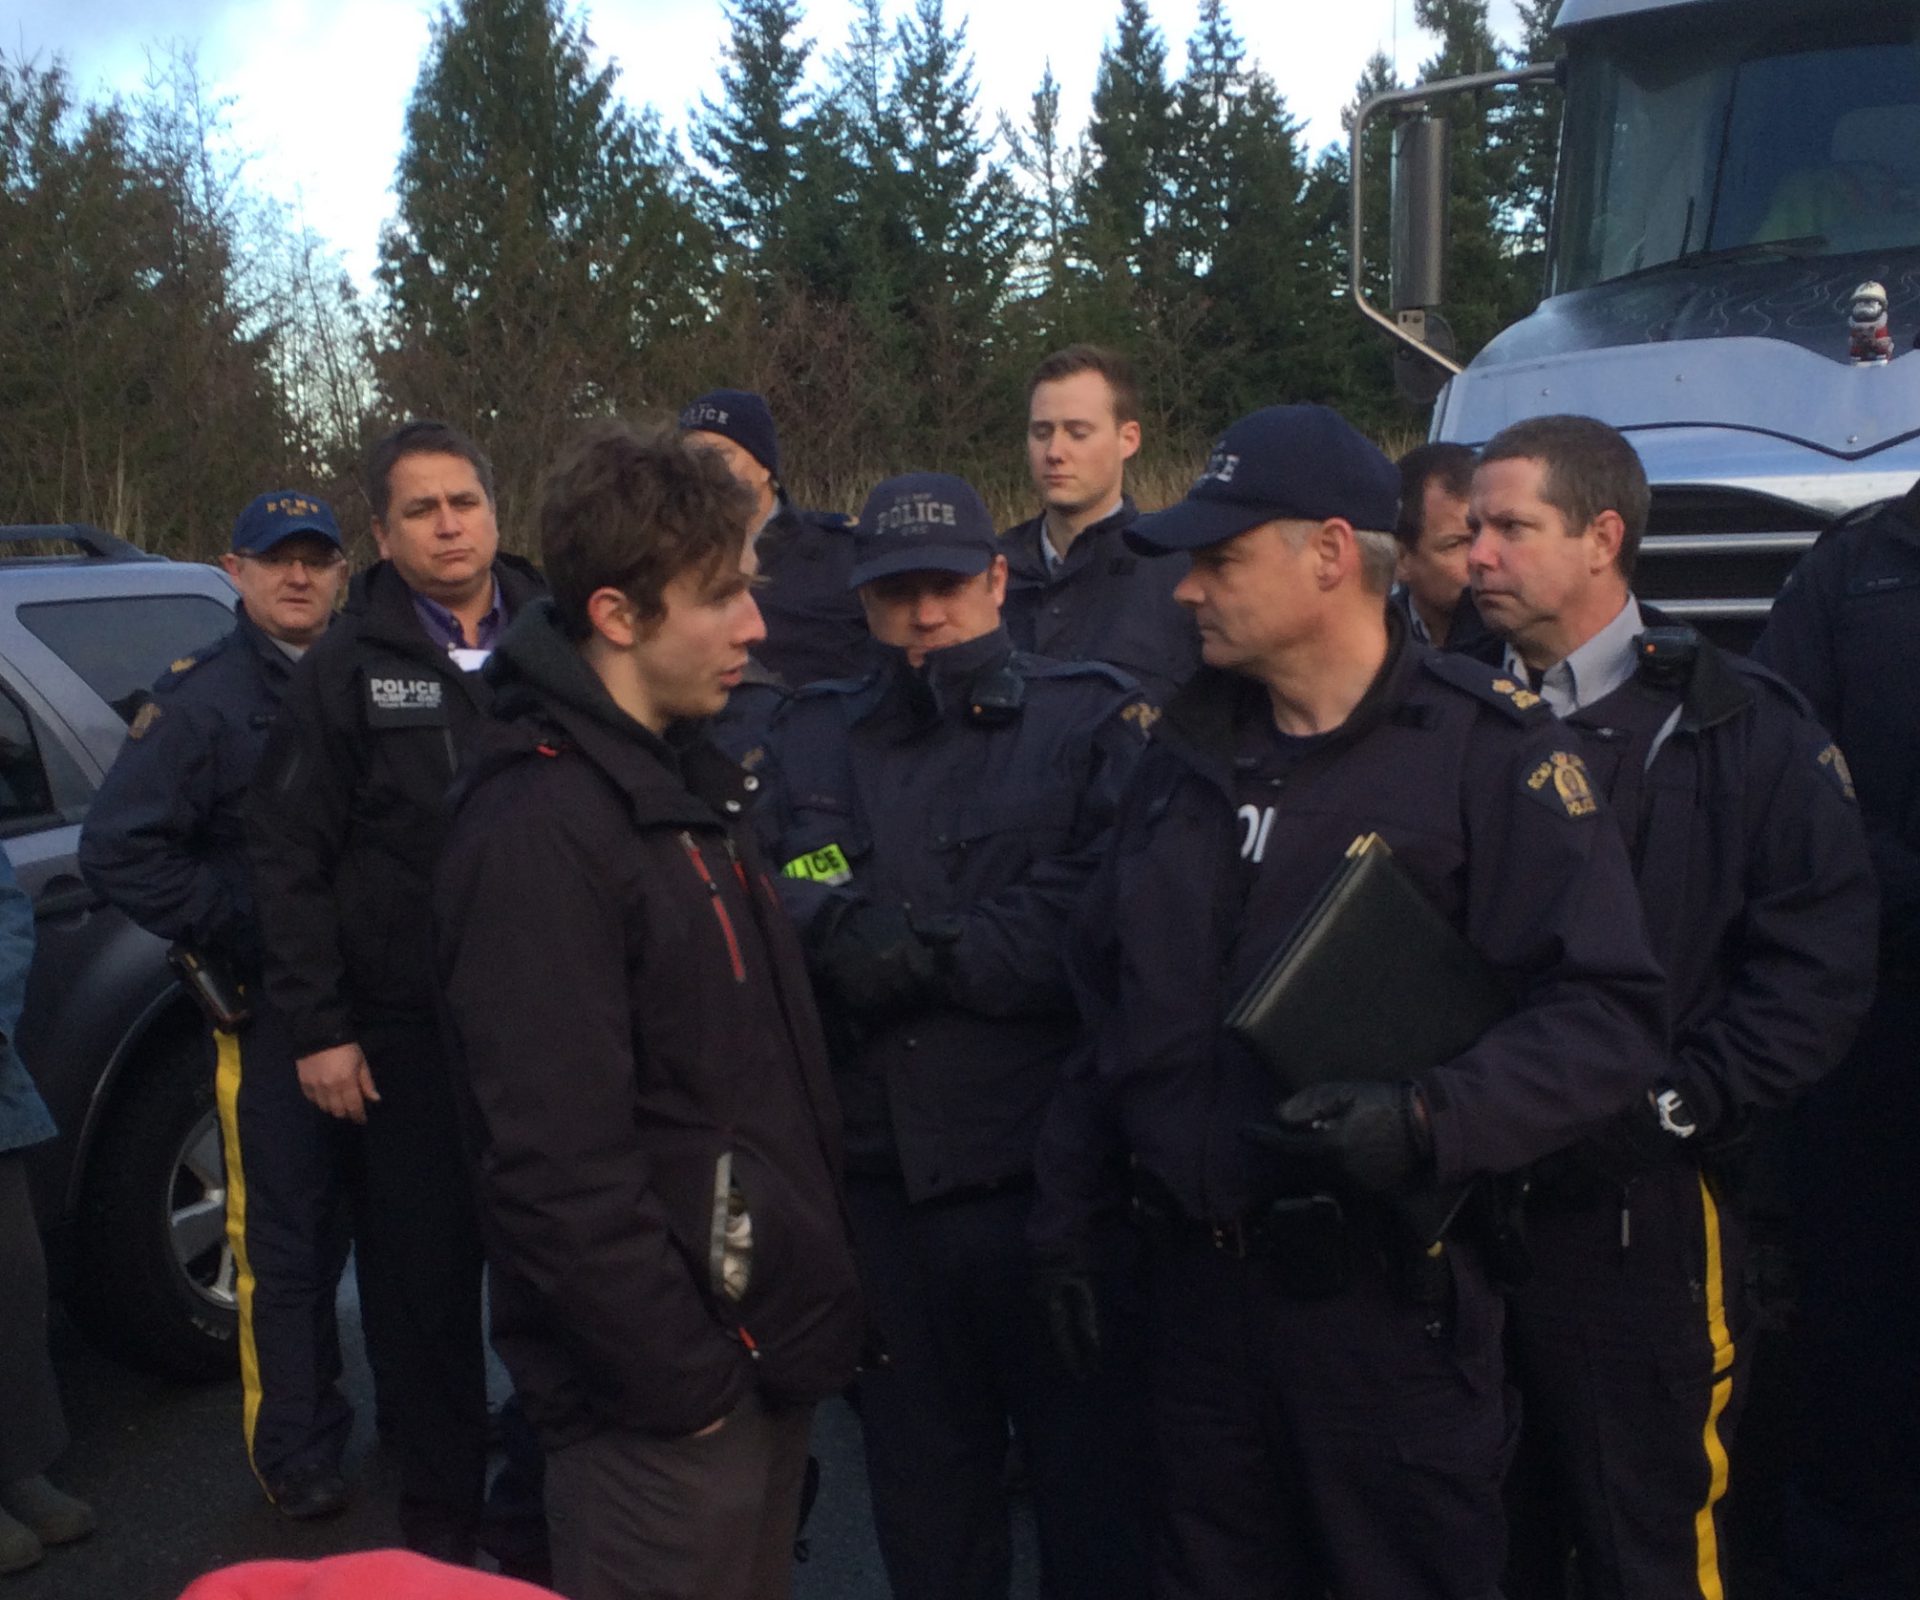 SIA protest in Shawnigan Lake leads to several arrests